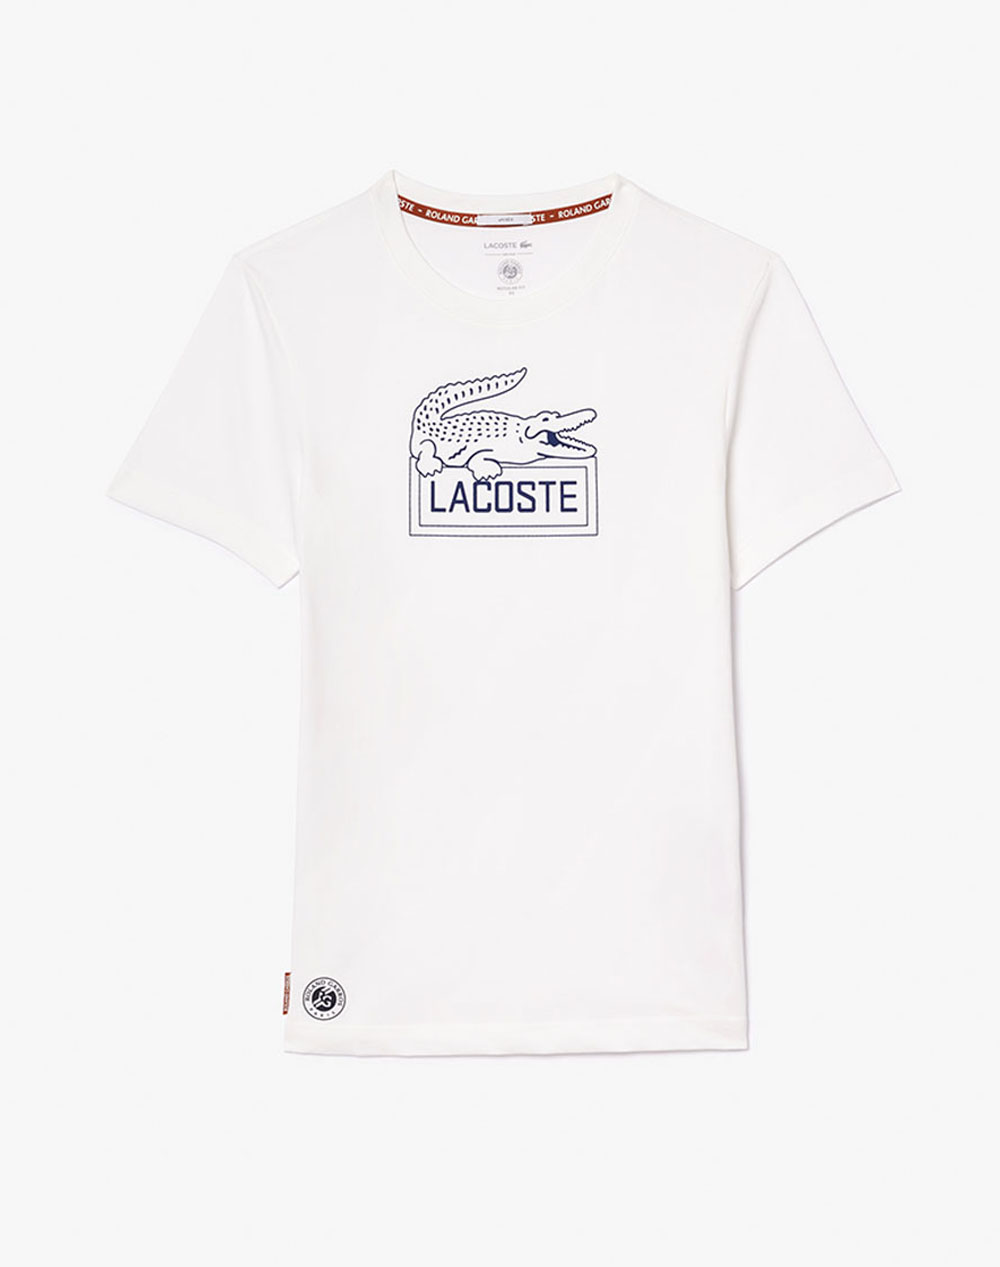 LACOSTE ΜΠΛΟΥΖΑ ΚΜ TEE-SHIRT SS 3TH9068-001 White